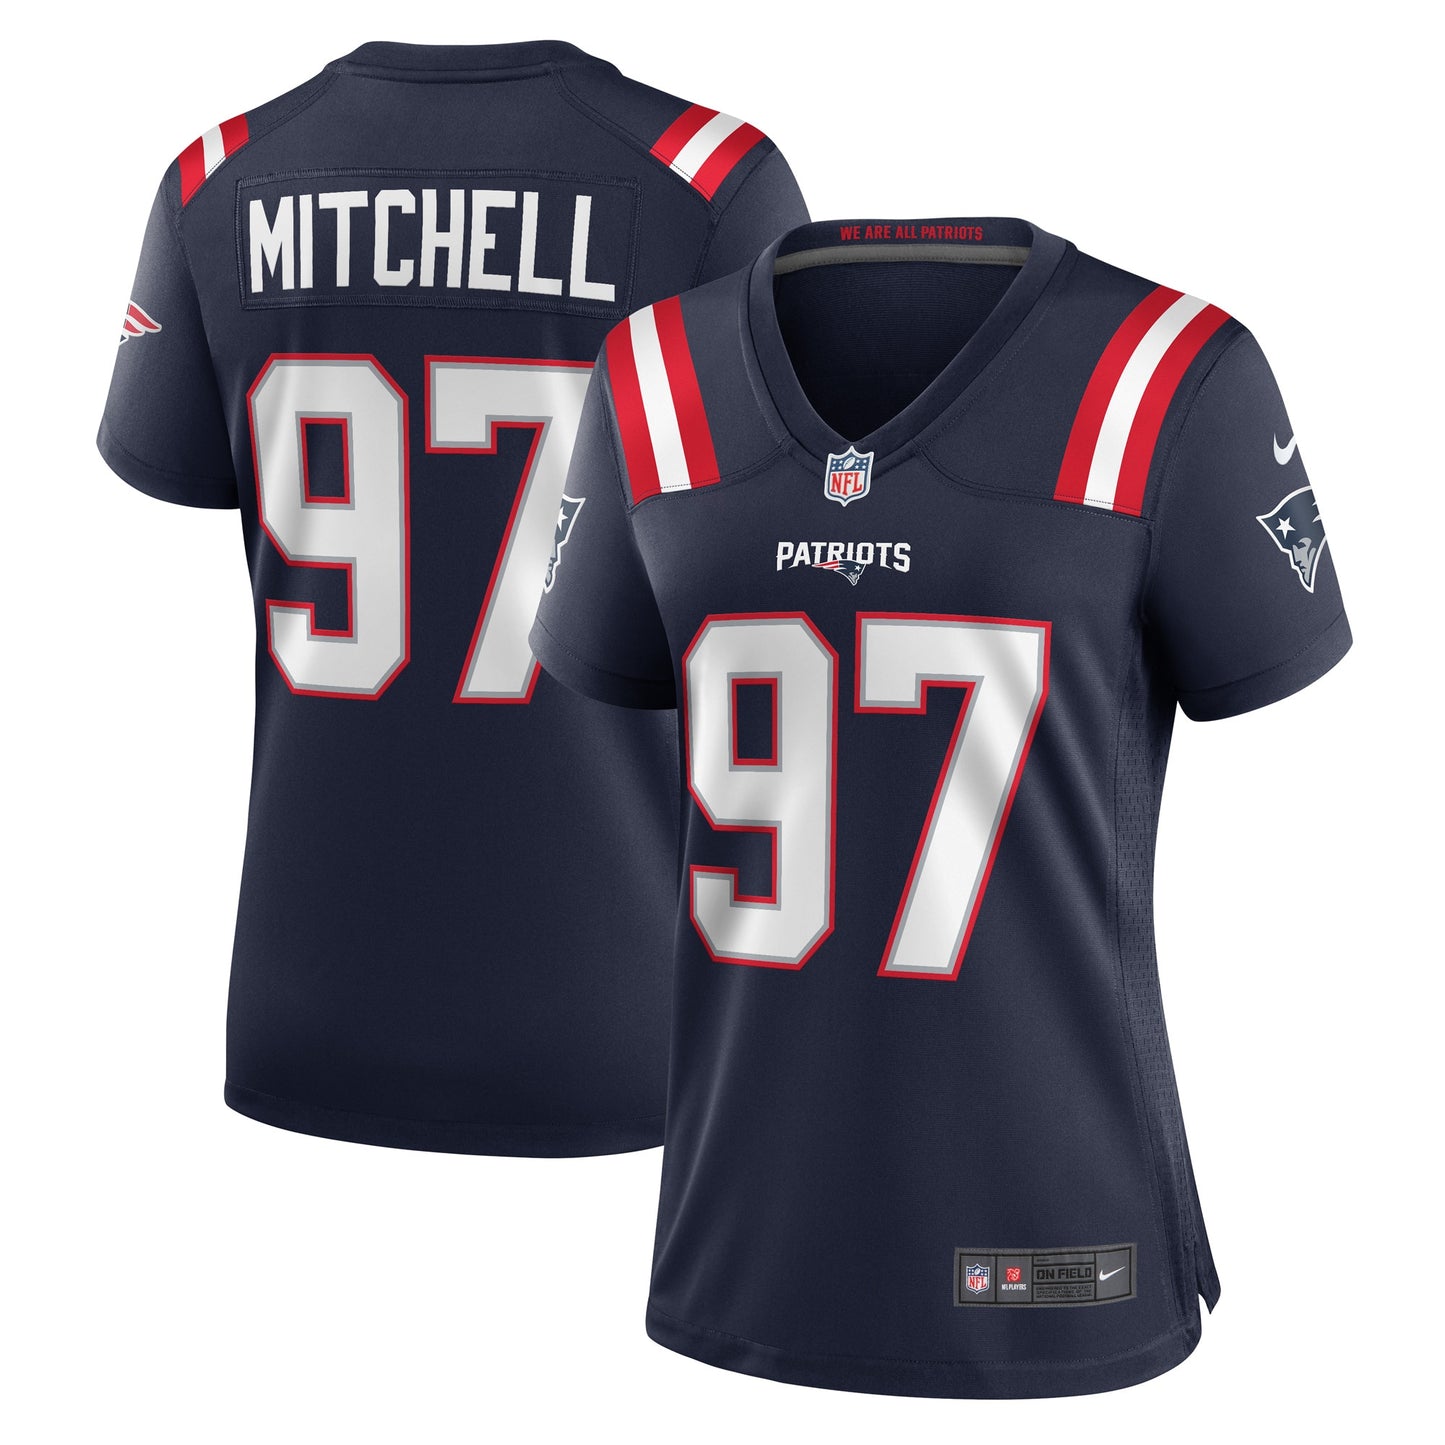 DaMarcus Mitchell New England Patriots Nike Women's Game Player Jersey - Navy